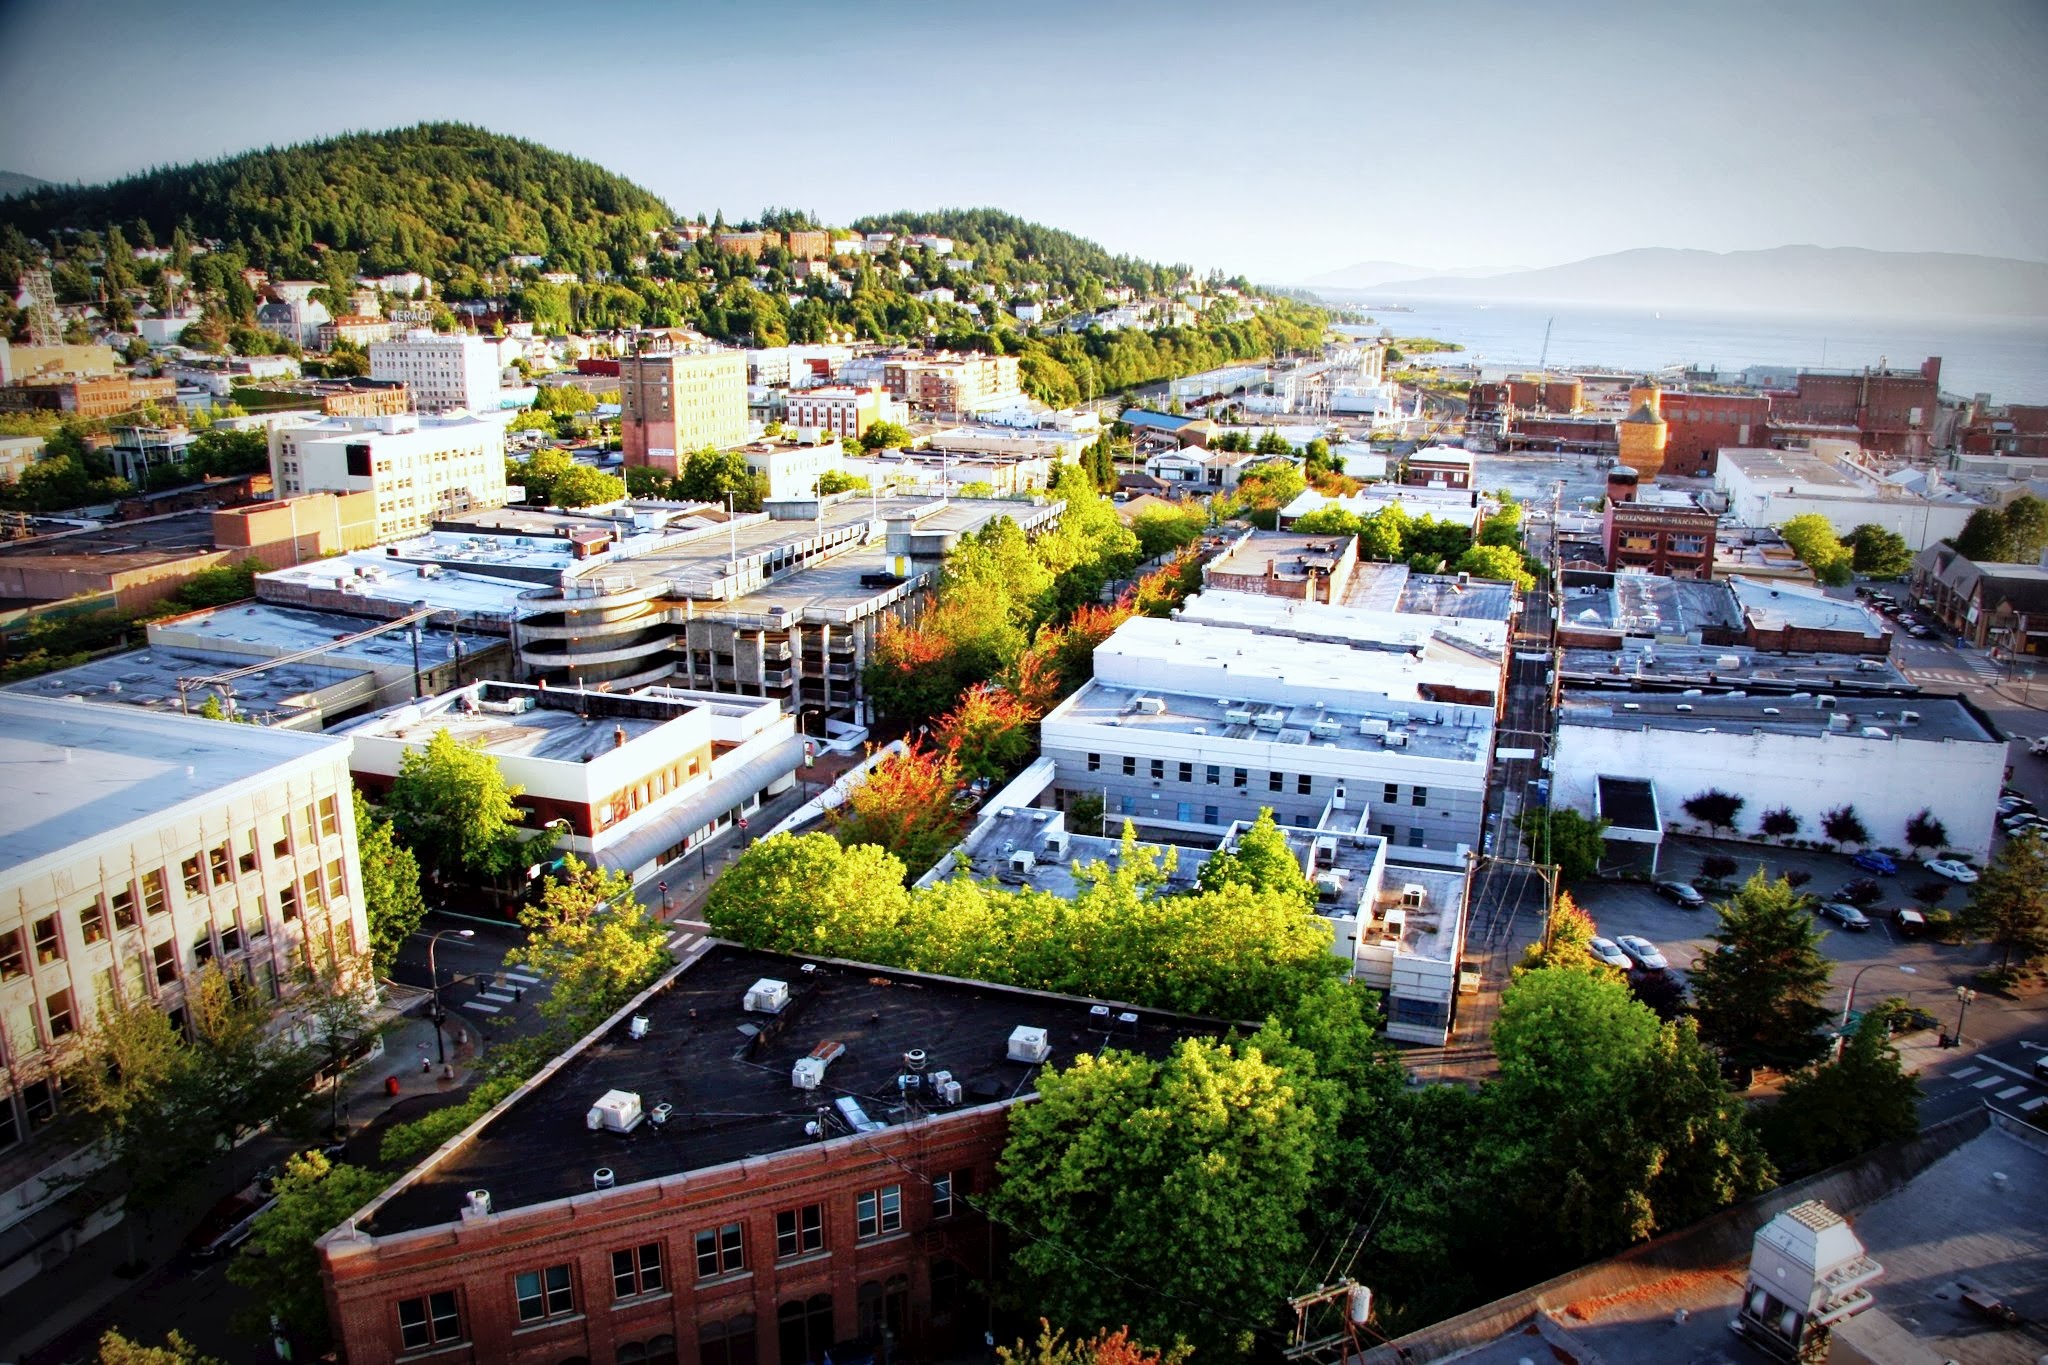 Downtown Bellingham at Sunset with a peekaboo view of the bay in the background.